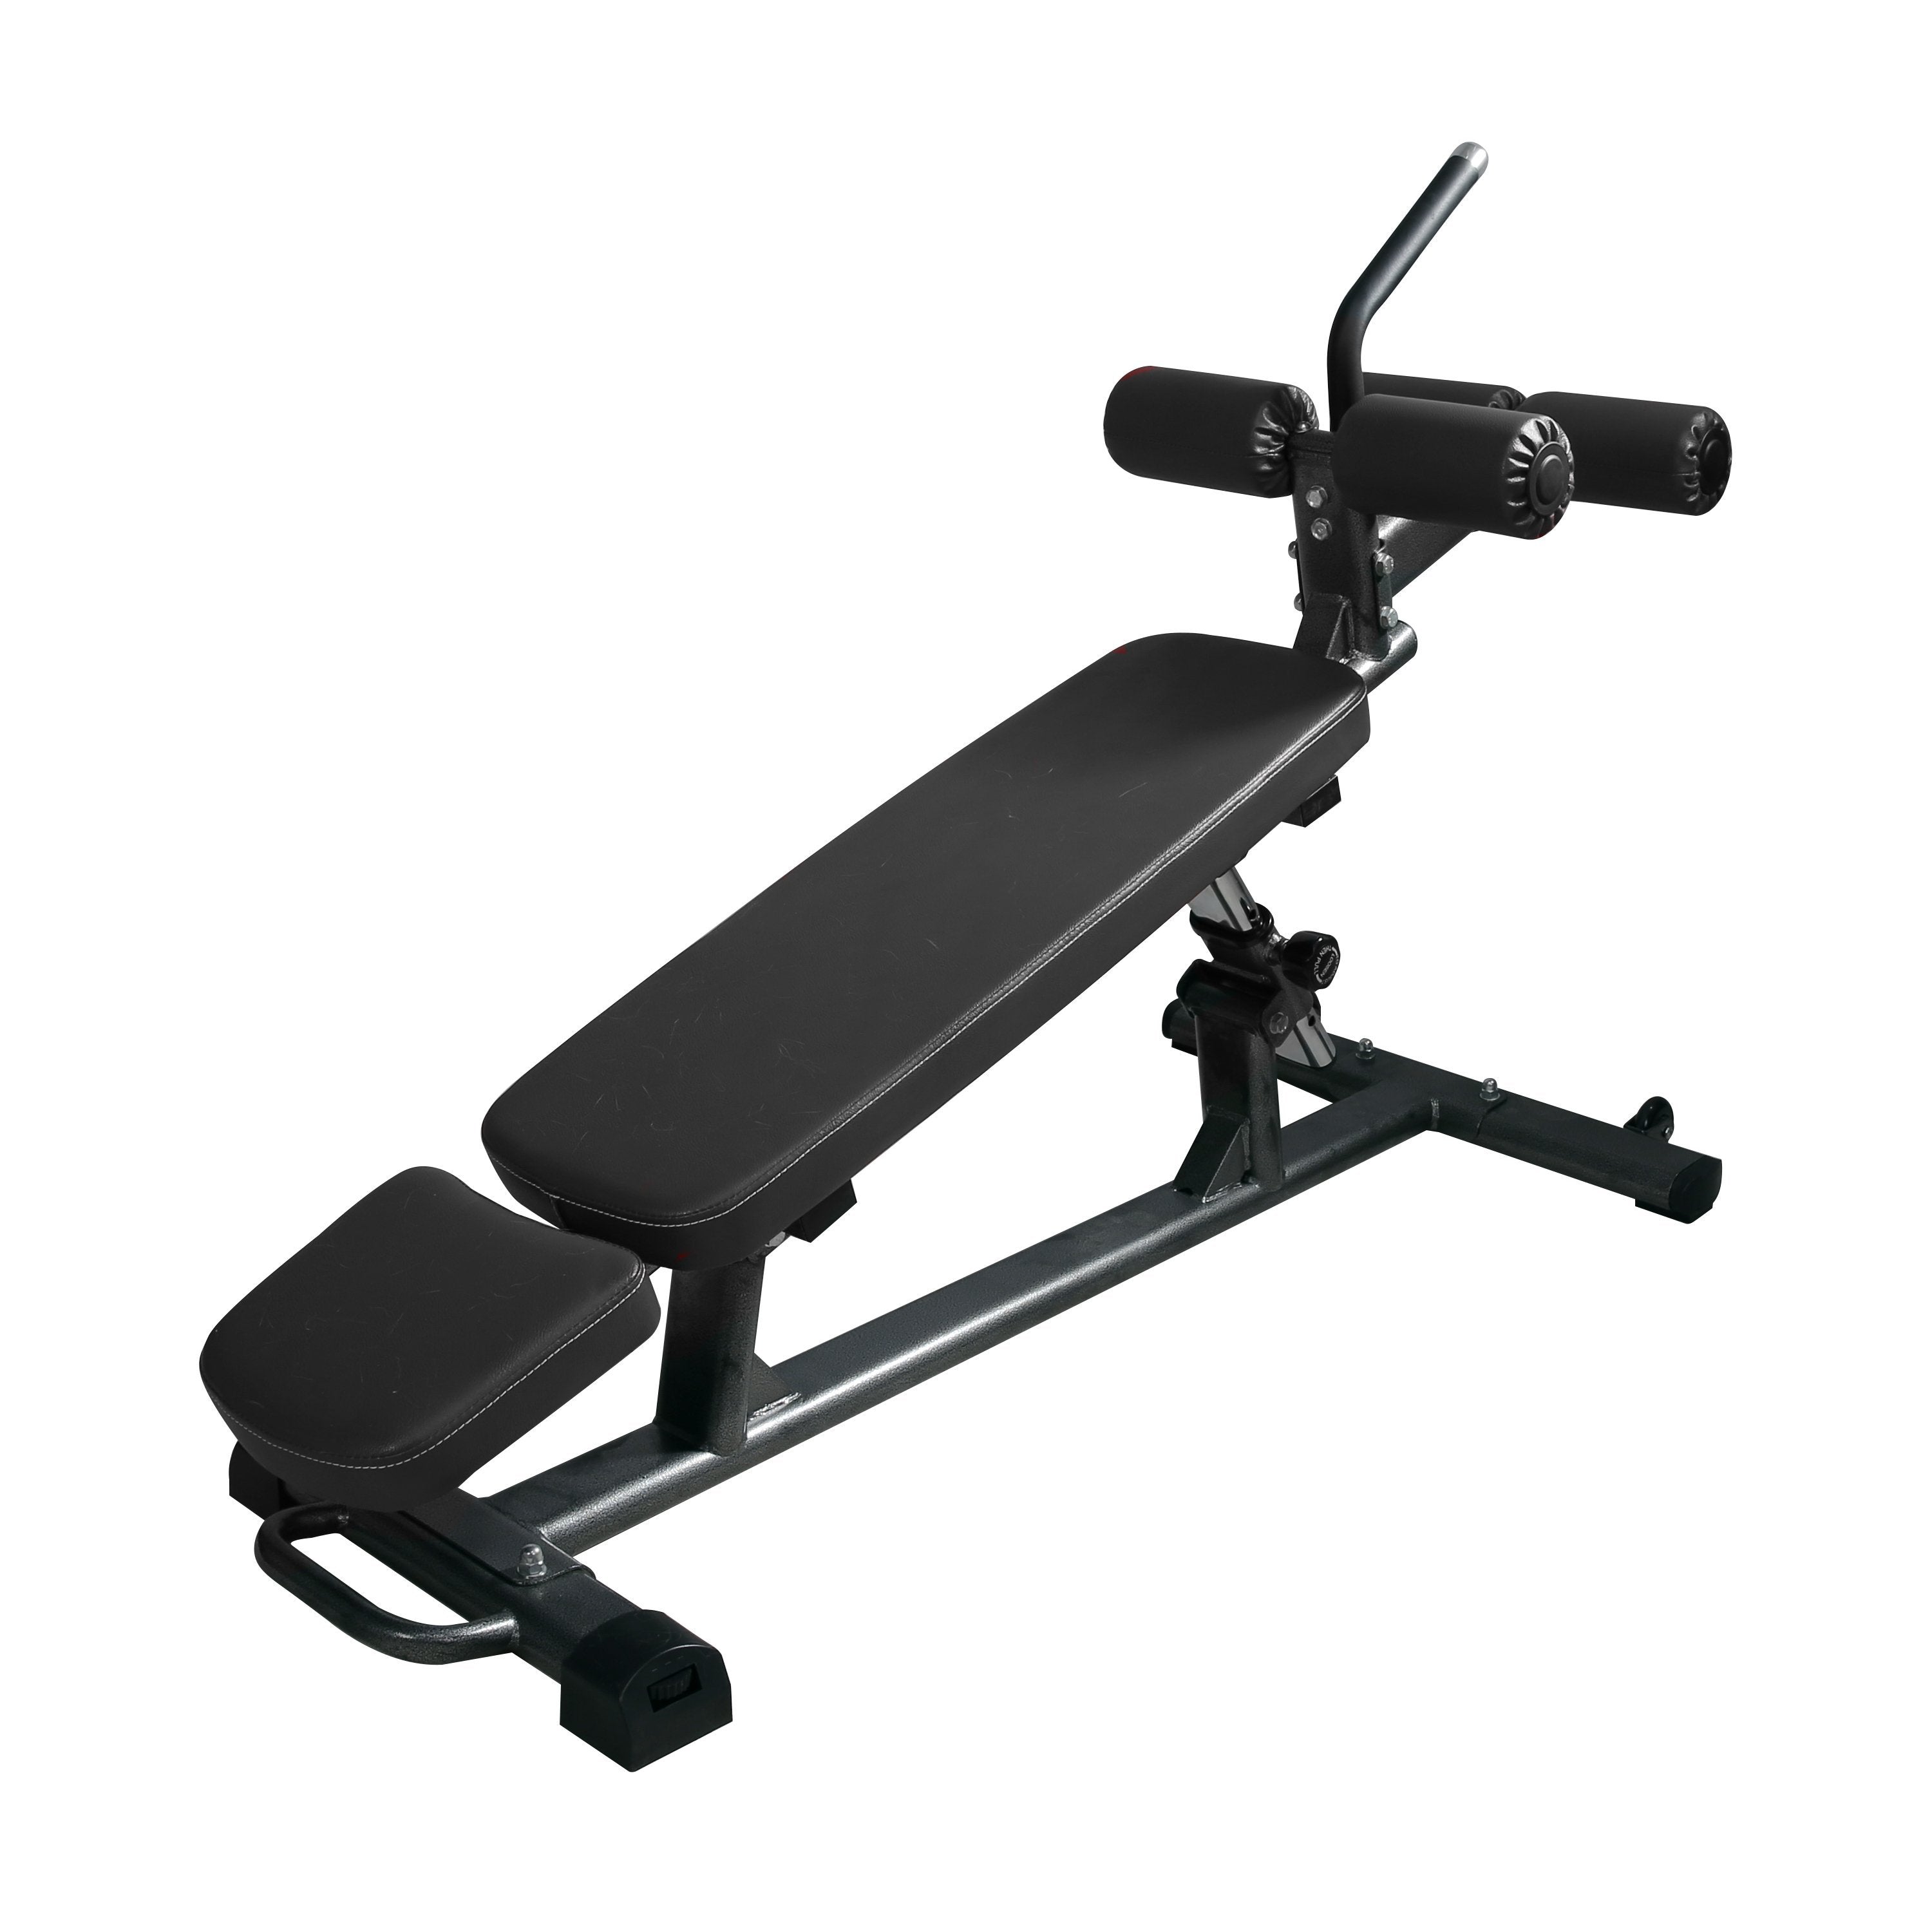 Sit-Up AB Bench SG-15 – SmartGym Fitness Accessories